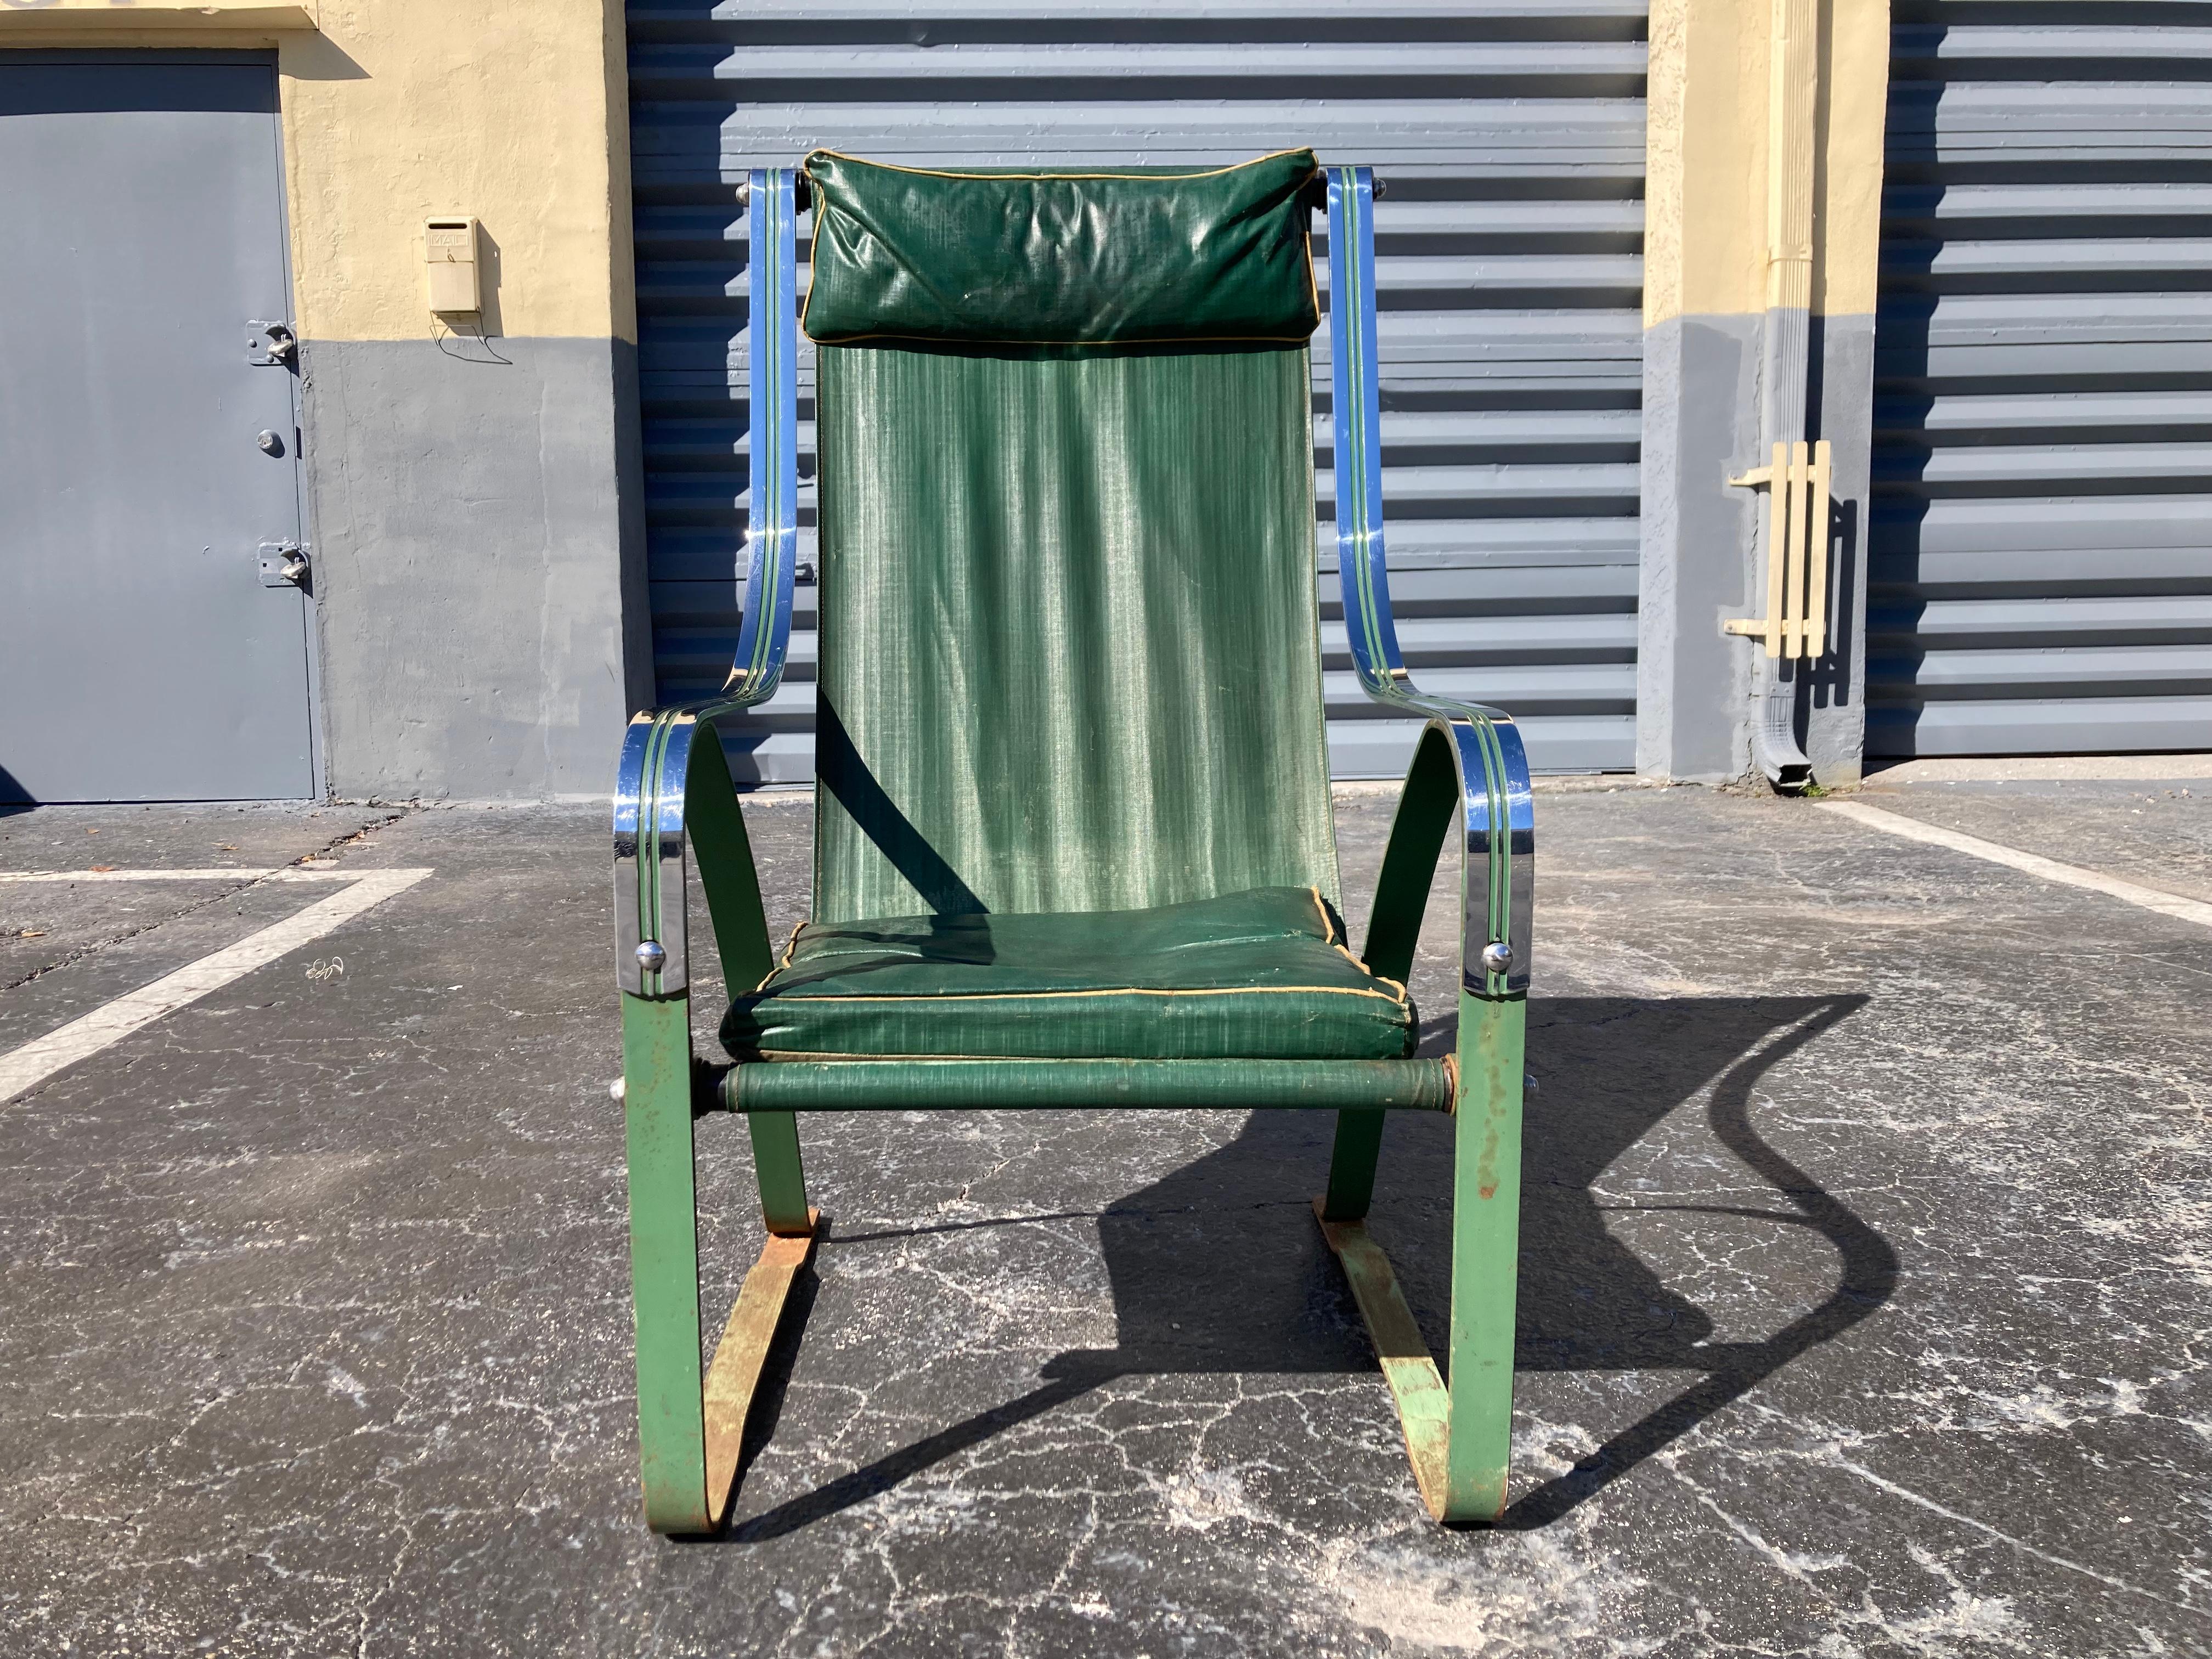 McKay Craft cantilever sling lounge chair designed by John McKay, in all original condition - chrome plated steel frame with green painted factory finish - green oil cloth upholstery sling with attached head rest pillow, seat cushion. Great color